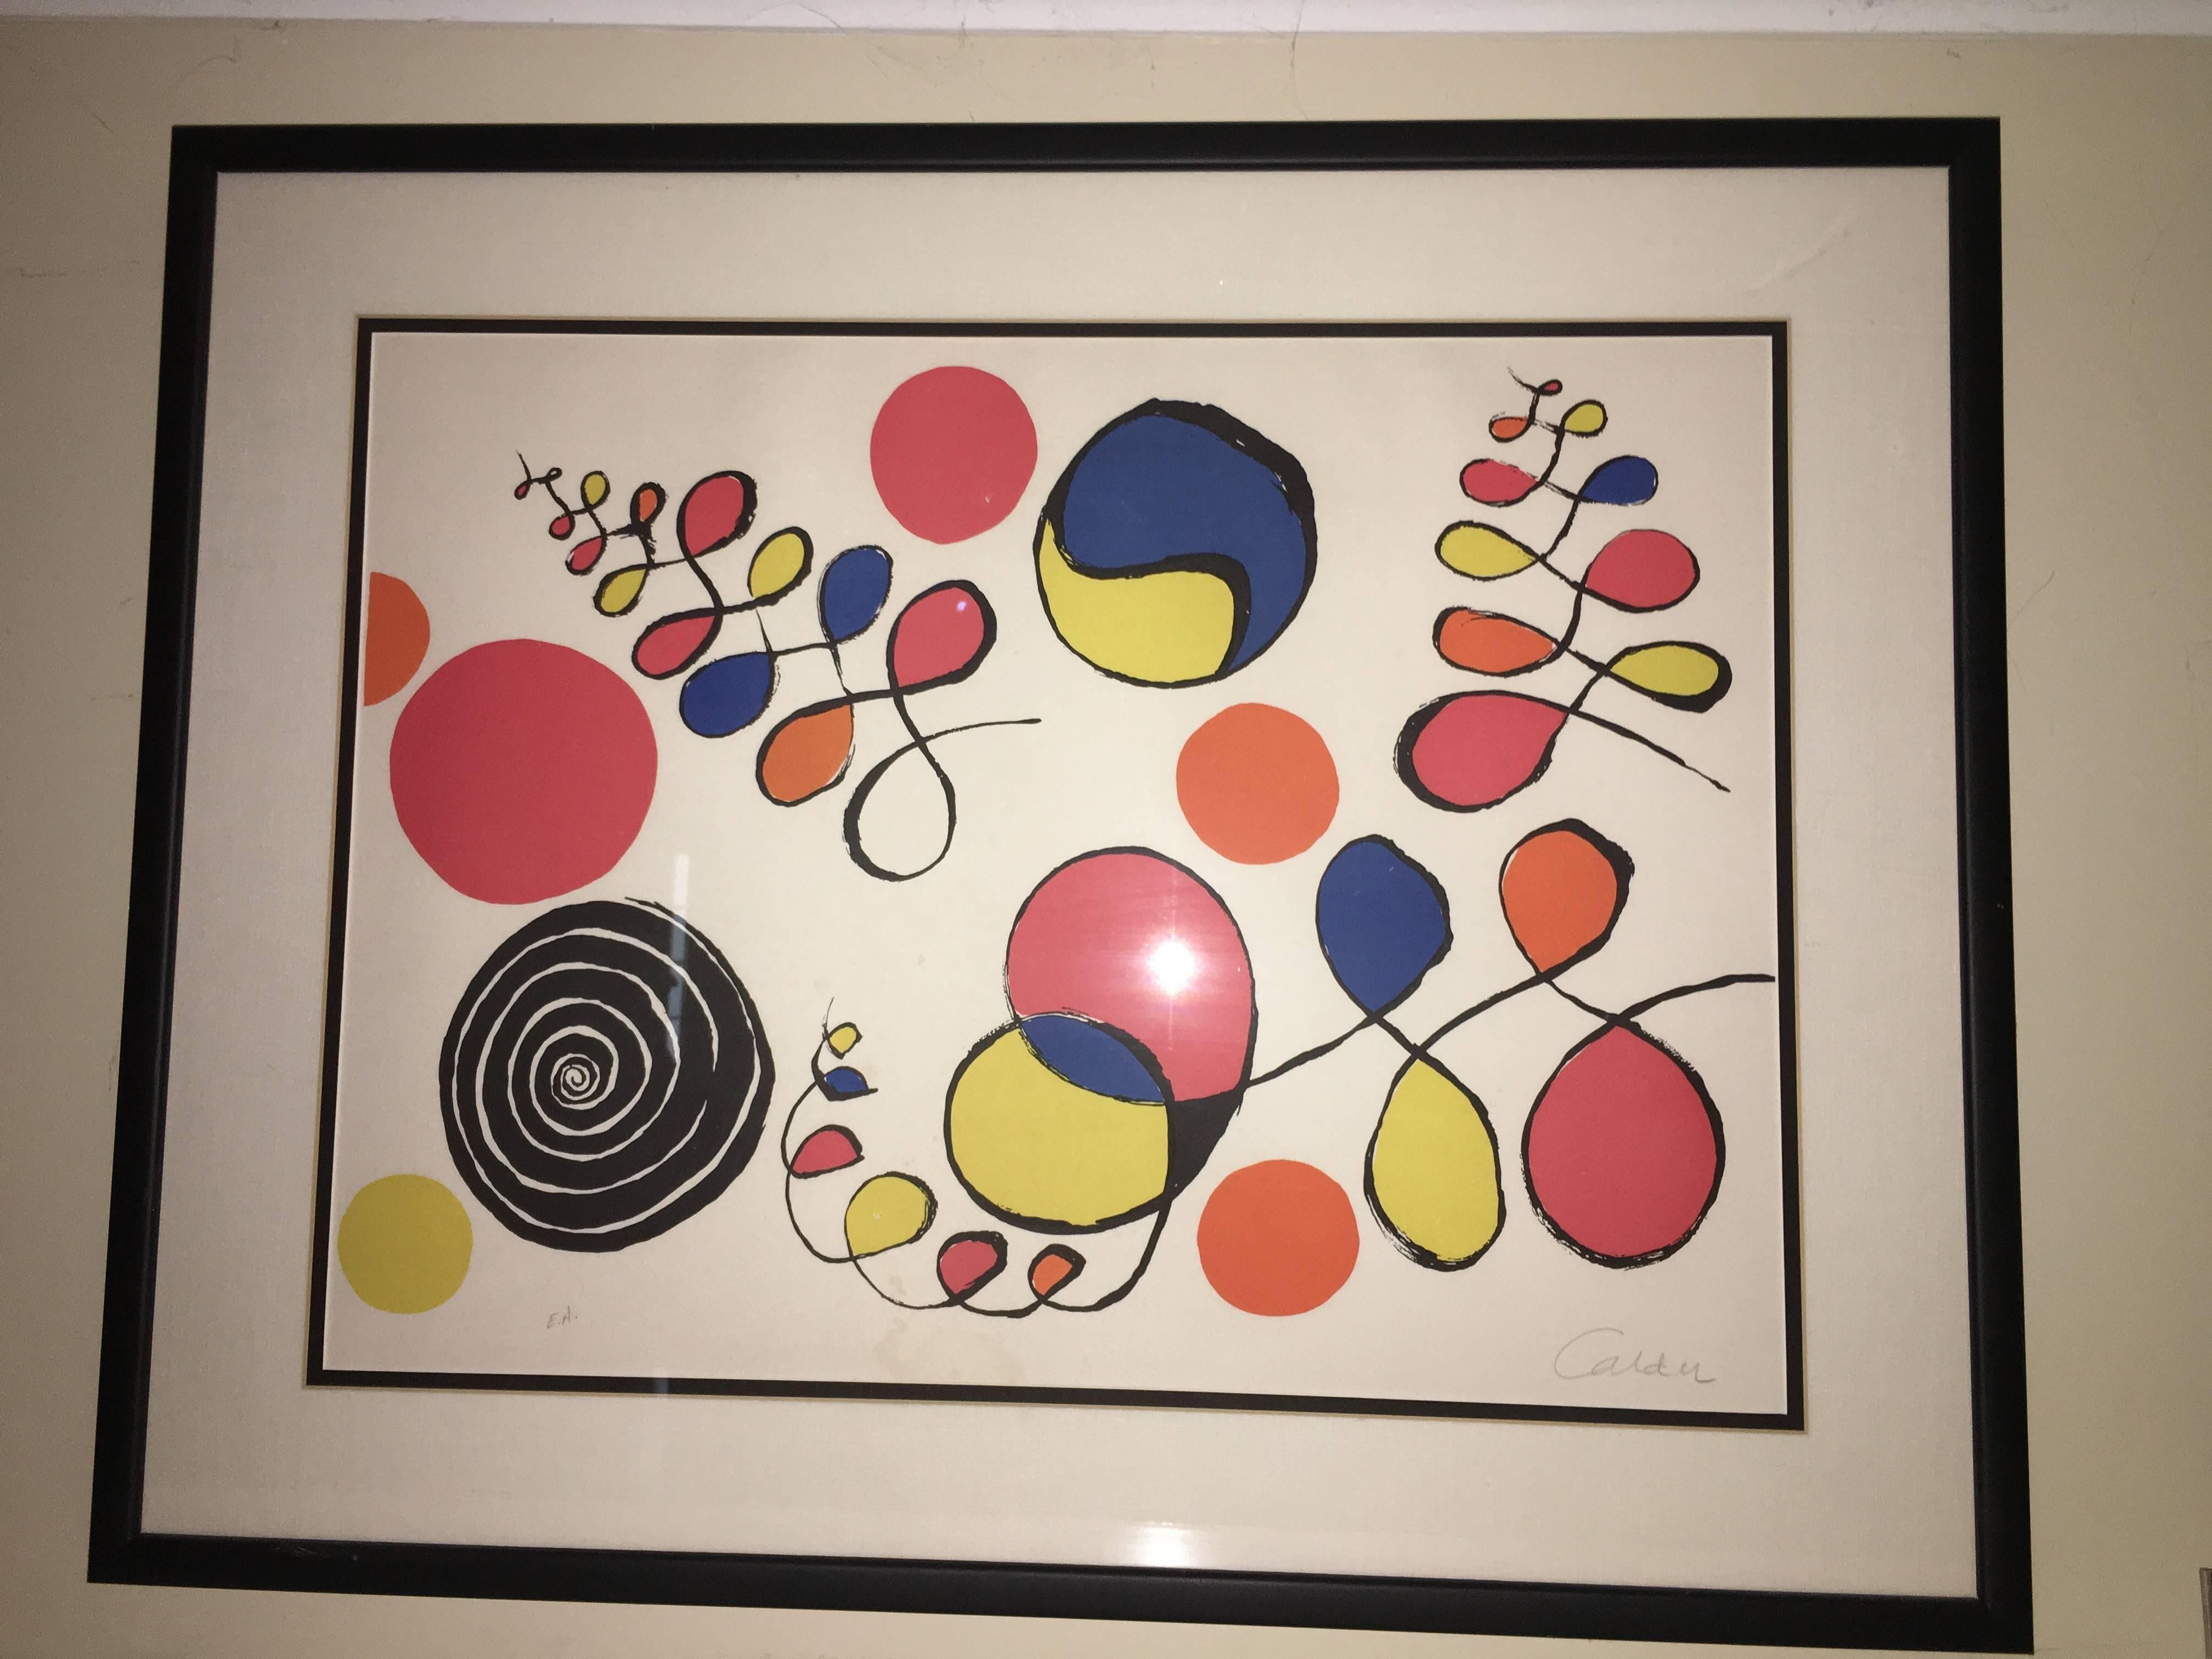 Terrific original pencil signed artists proof lithograph by Alexander Calder. This beautiful piece depicts colorful abstract spirals. It is pencil signed Calder EA which stands for its French name, epreuve d'artist. Framed and ready to hang.